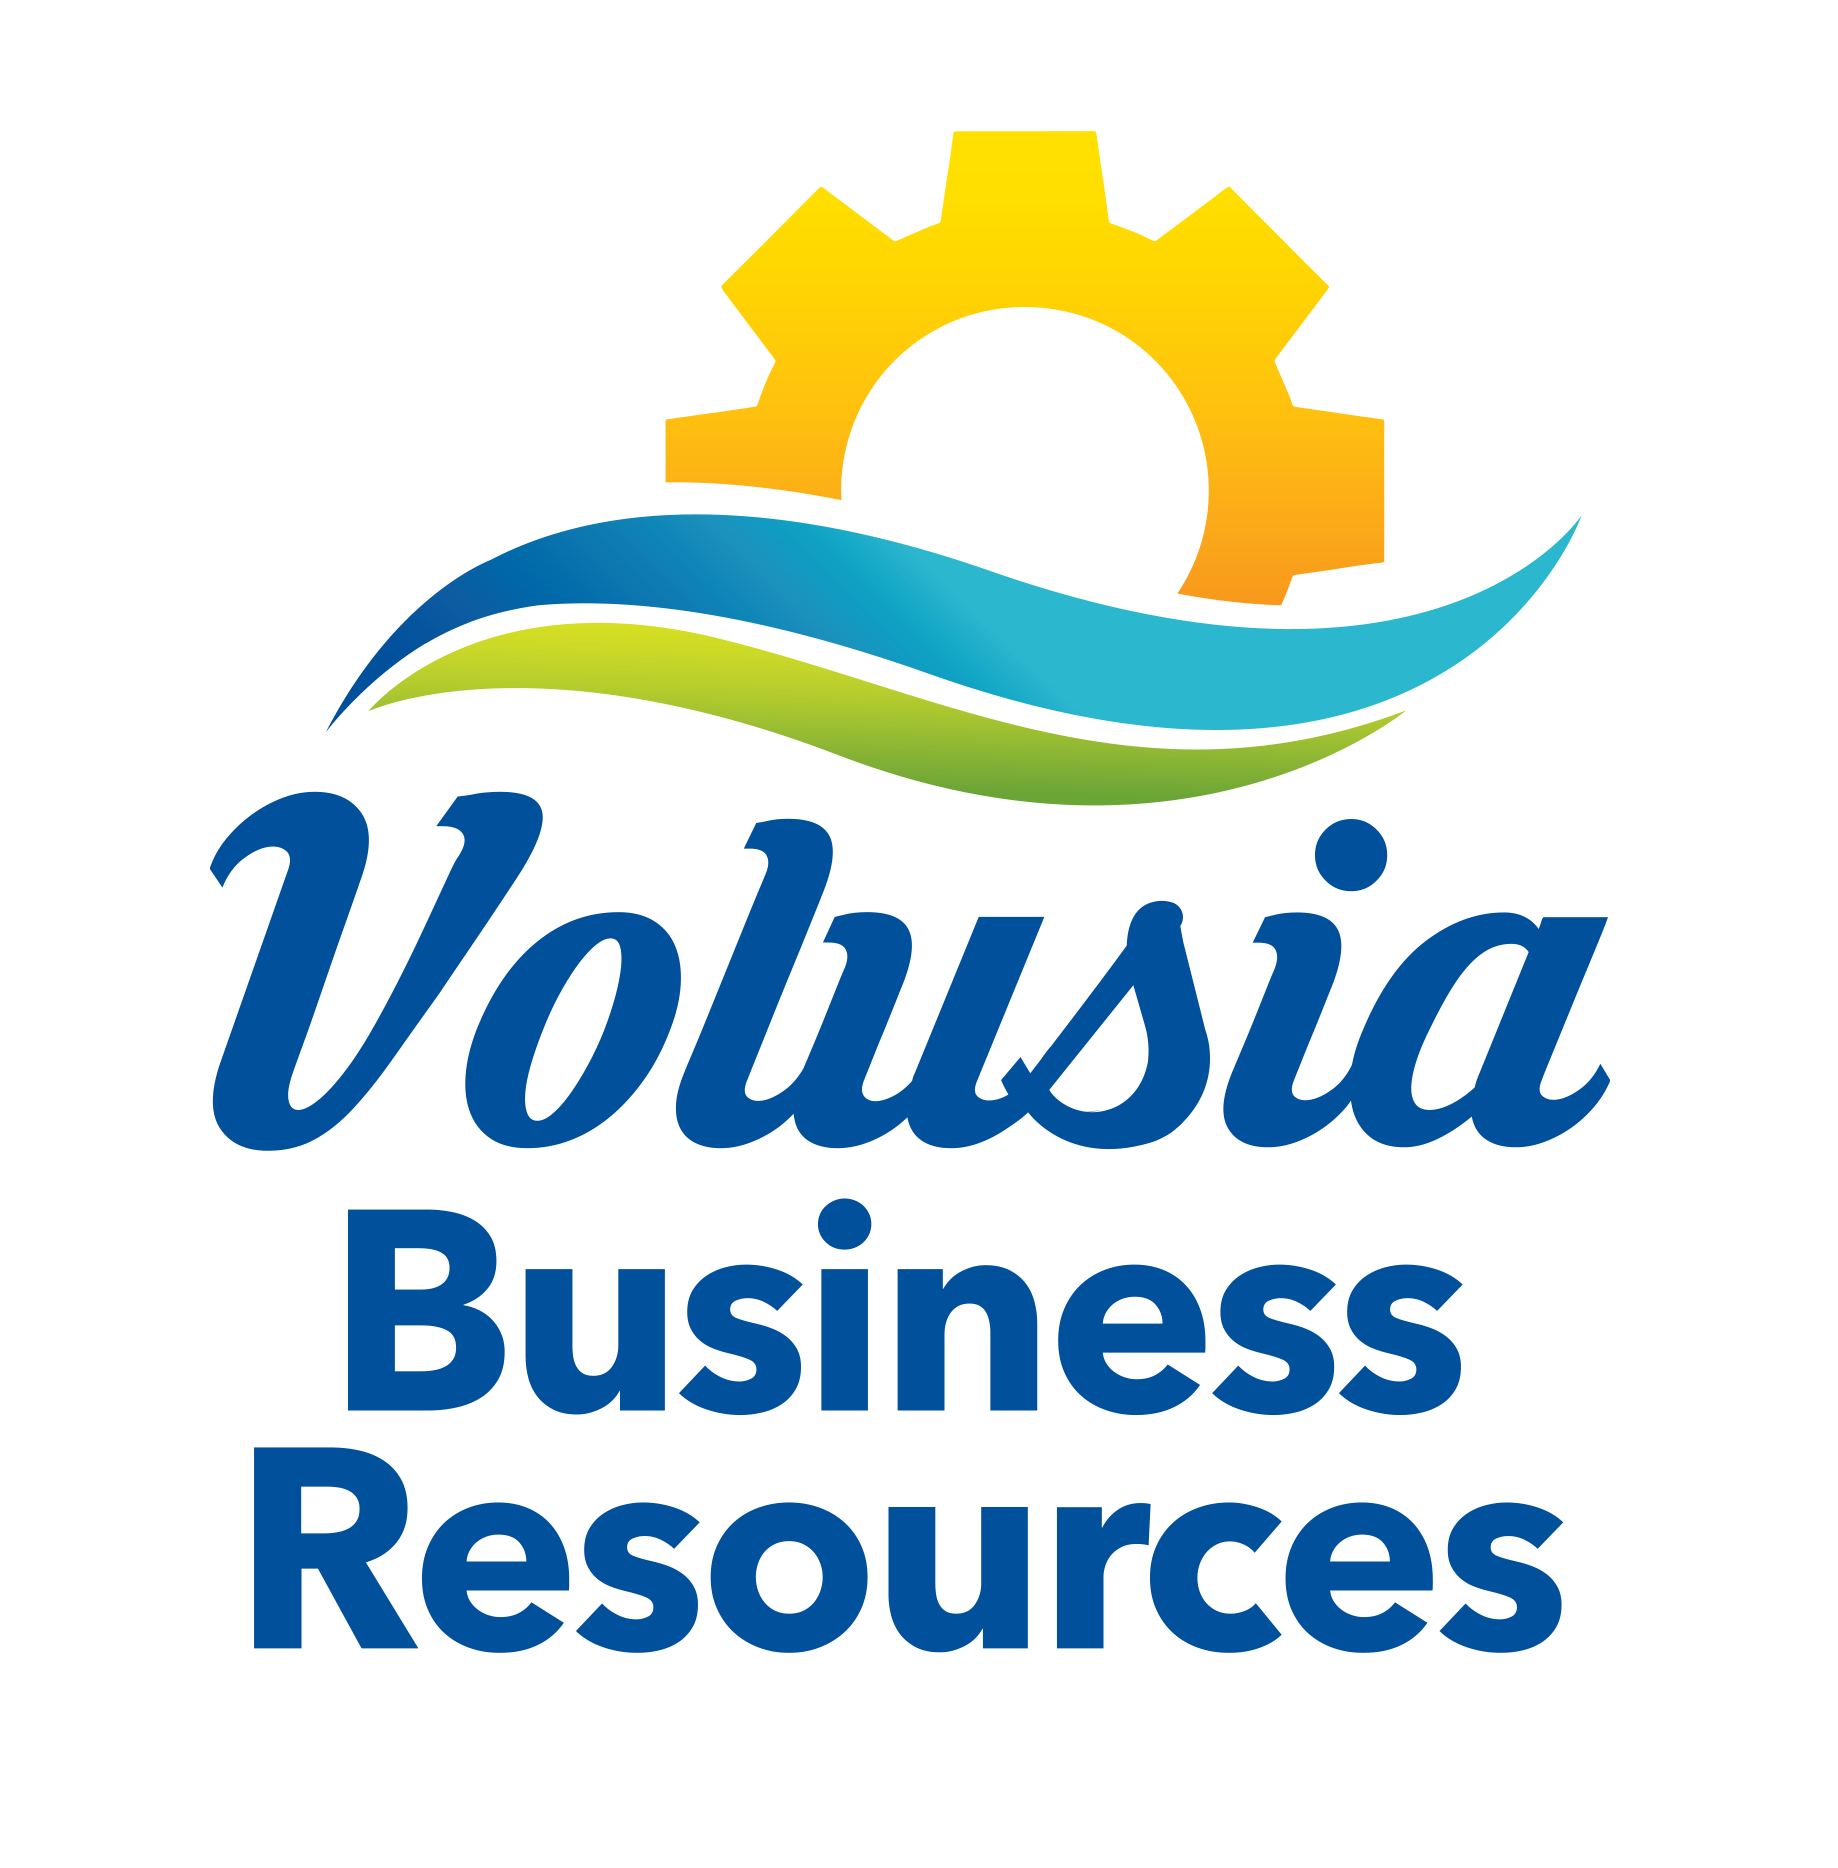 logo of volusia business resources